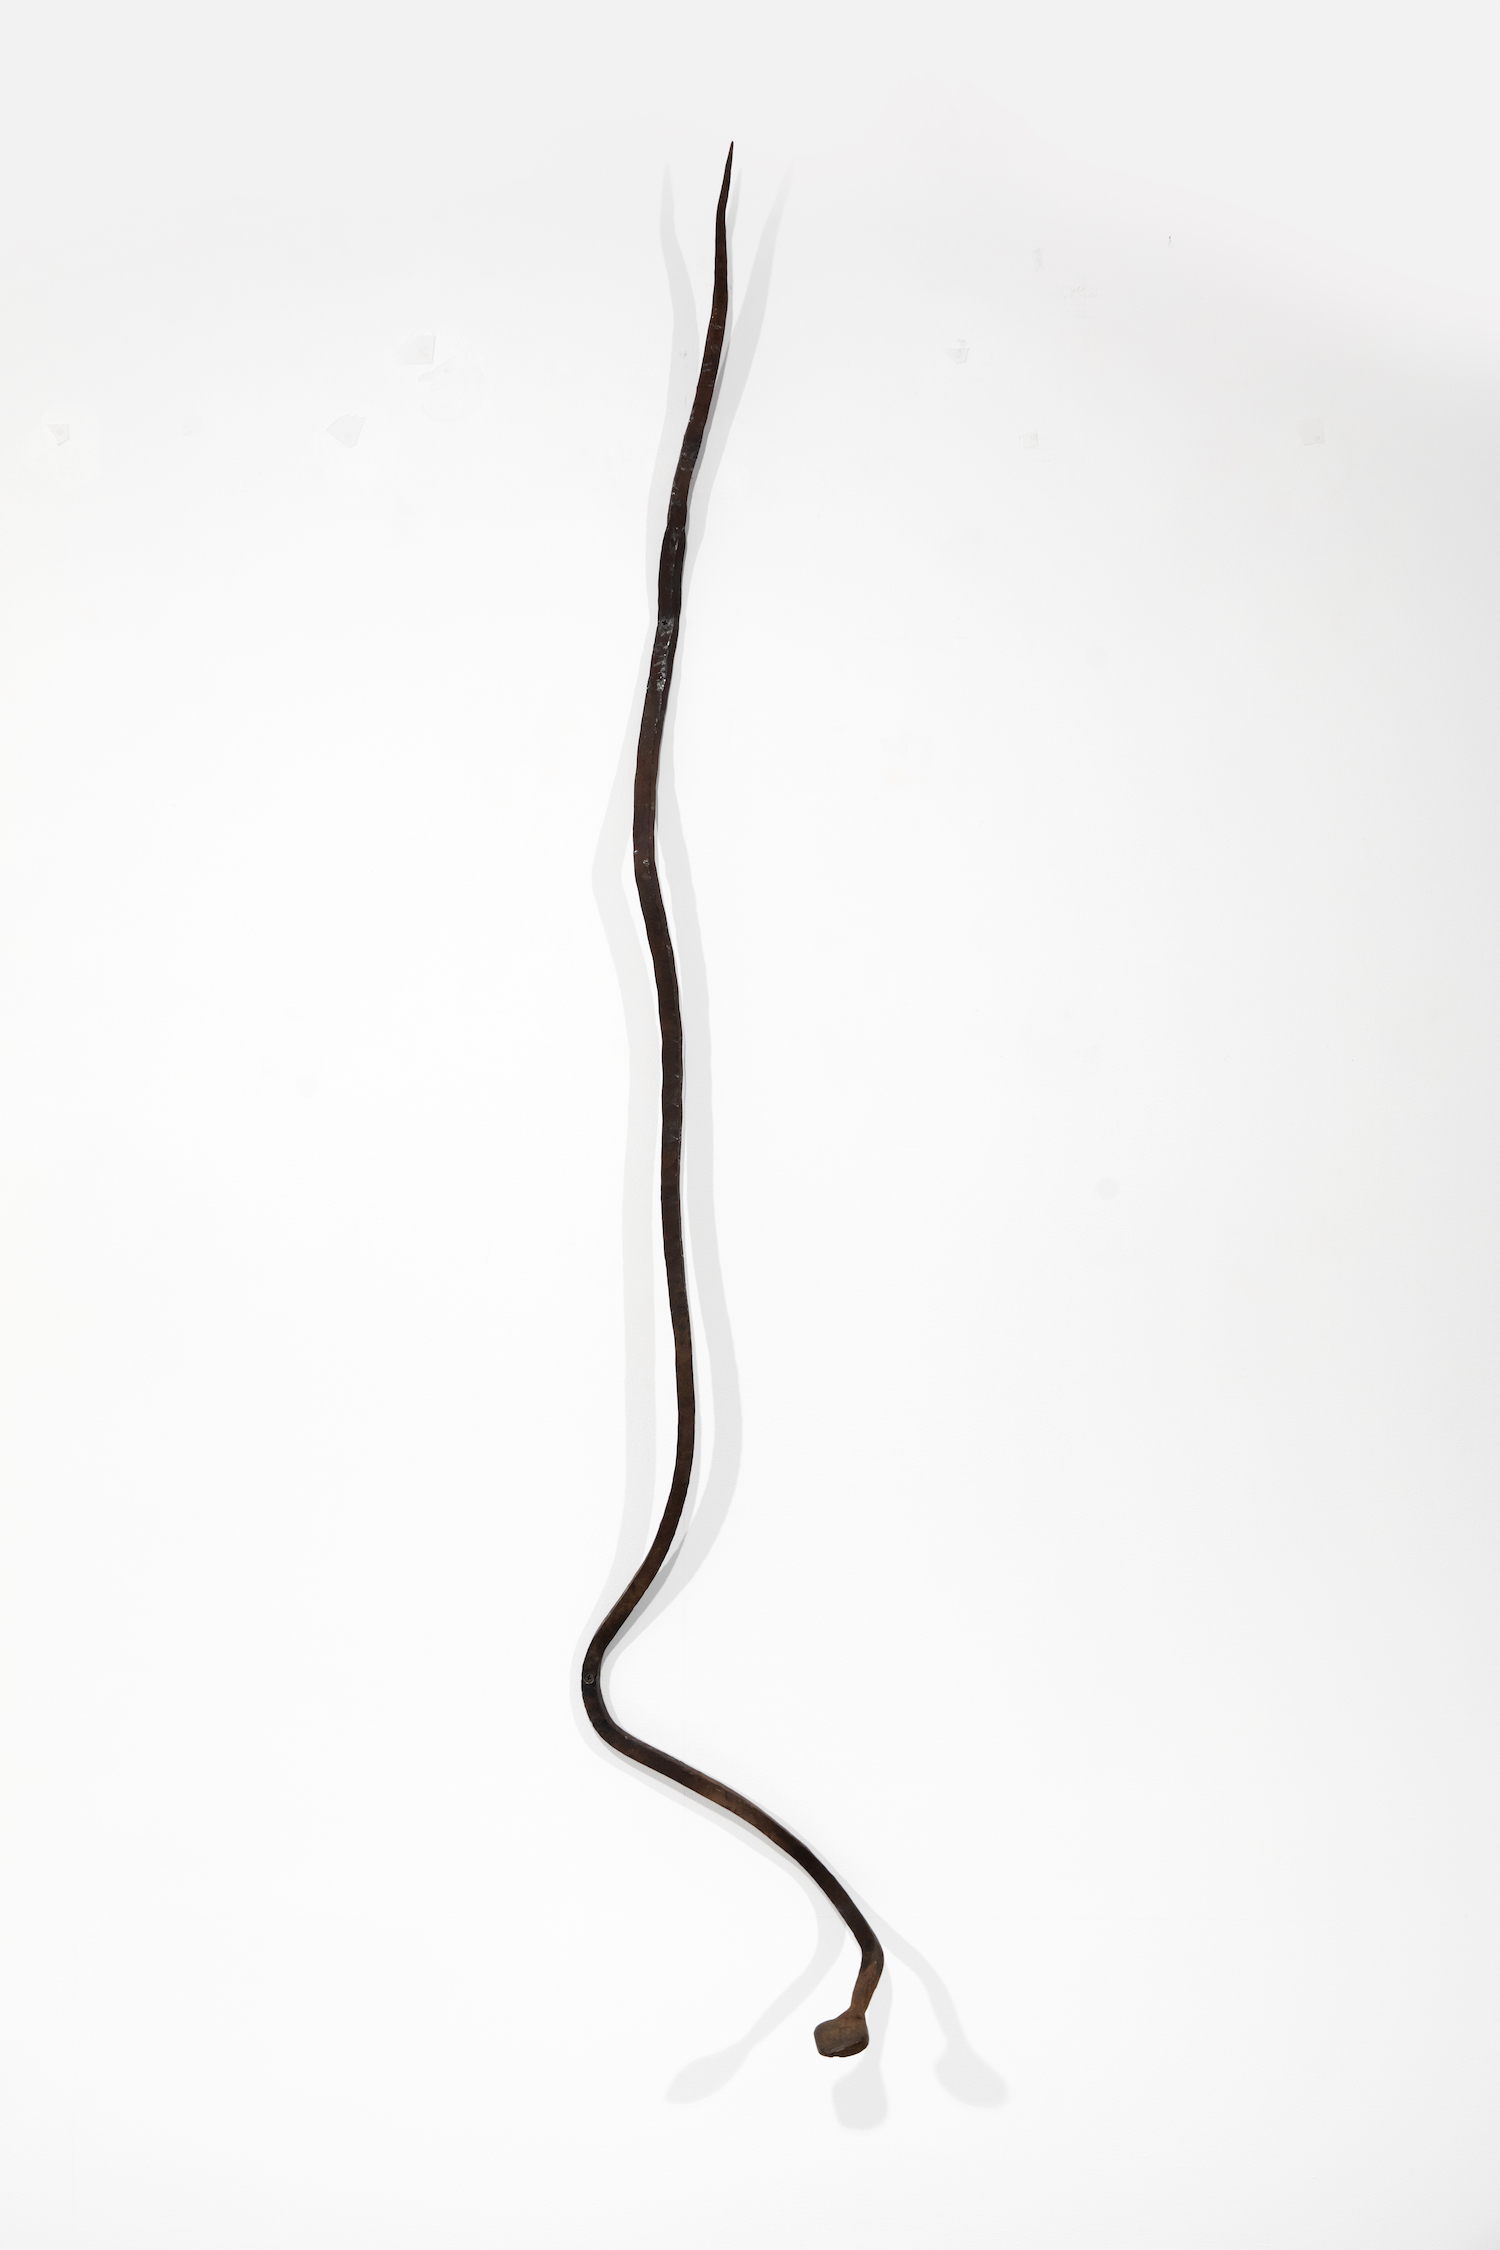 Radcliffe Bailey, King Snake, 2021. Steel, 66 x 11 x 7 1/2 inches (167.6 x 27.9 x 19.1 cm). The Long Gallery Harlem Collection. © Radcliffe Bailey. Courtesy of the artist and Jack Shainman Gallery, New York.